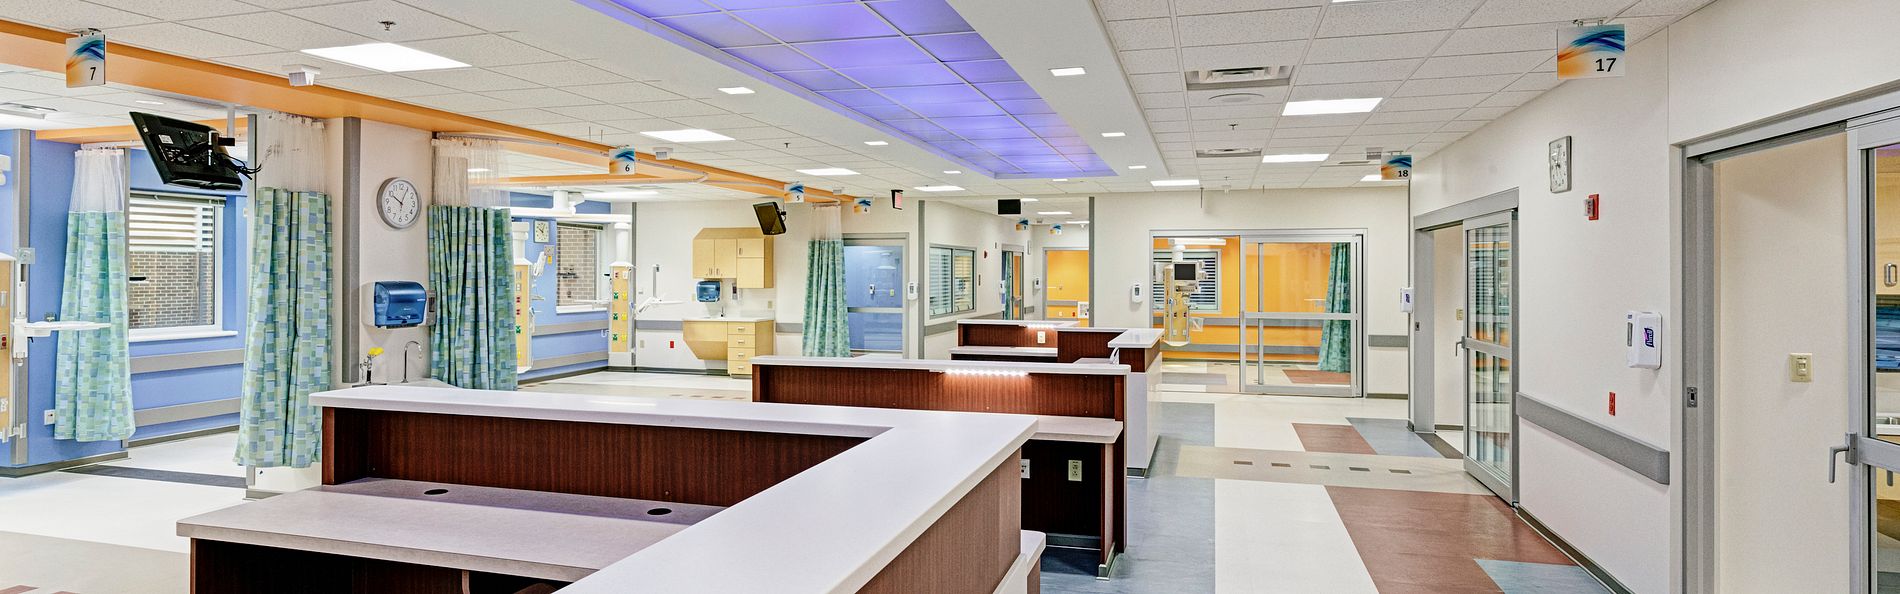 The interior was designed to create a more efficient work flow for the staff and a more positive environment for the patients and their families